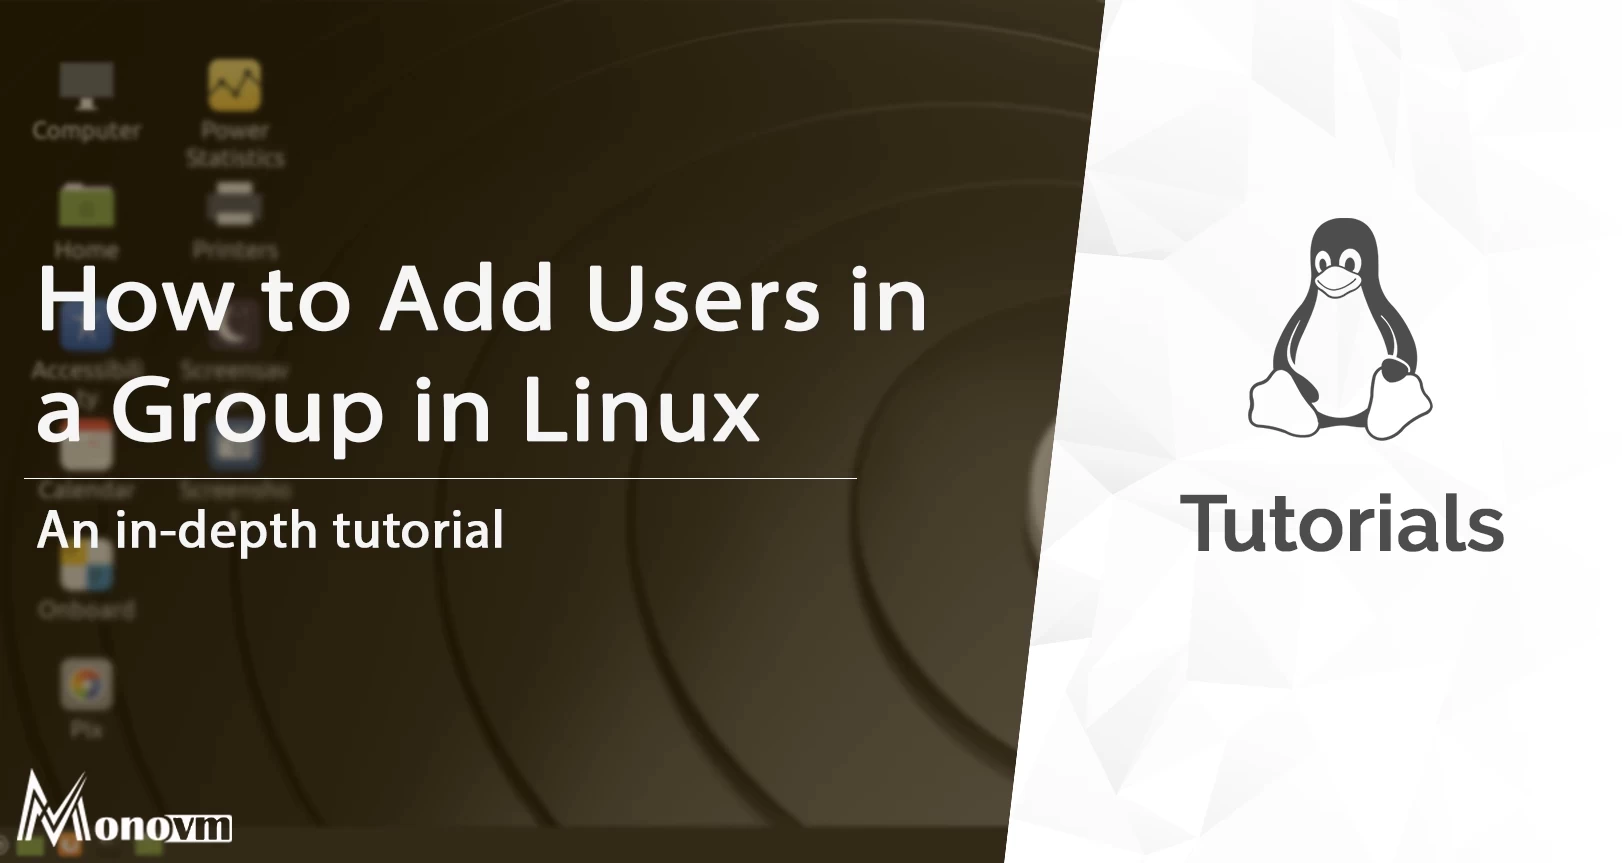 How to Add Users in a Group in Linux